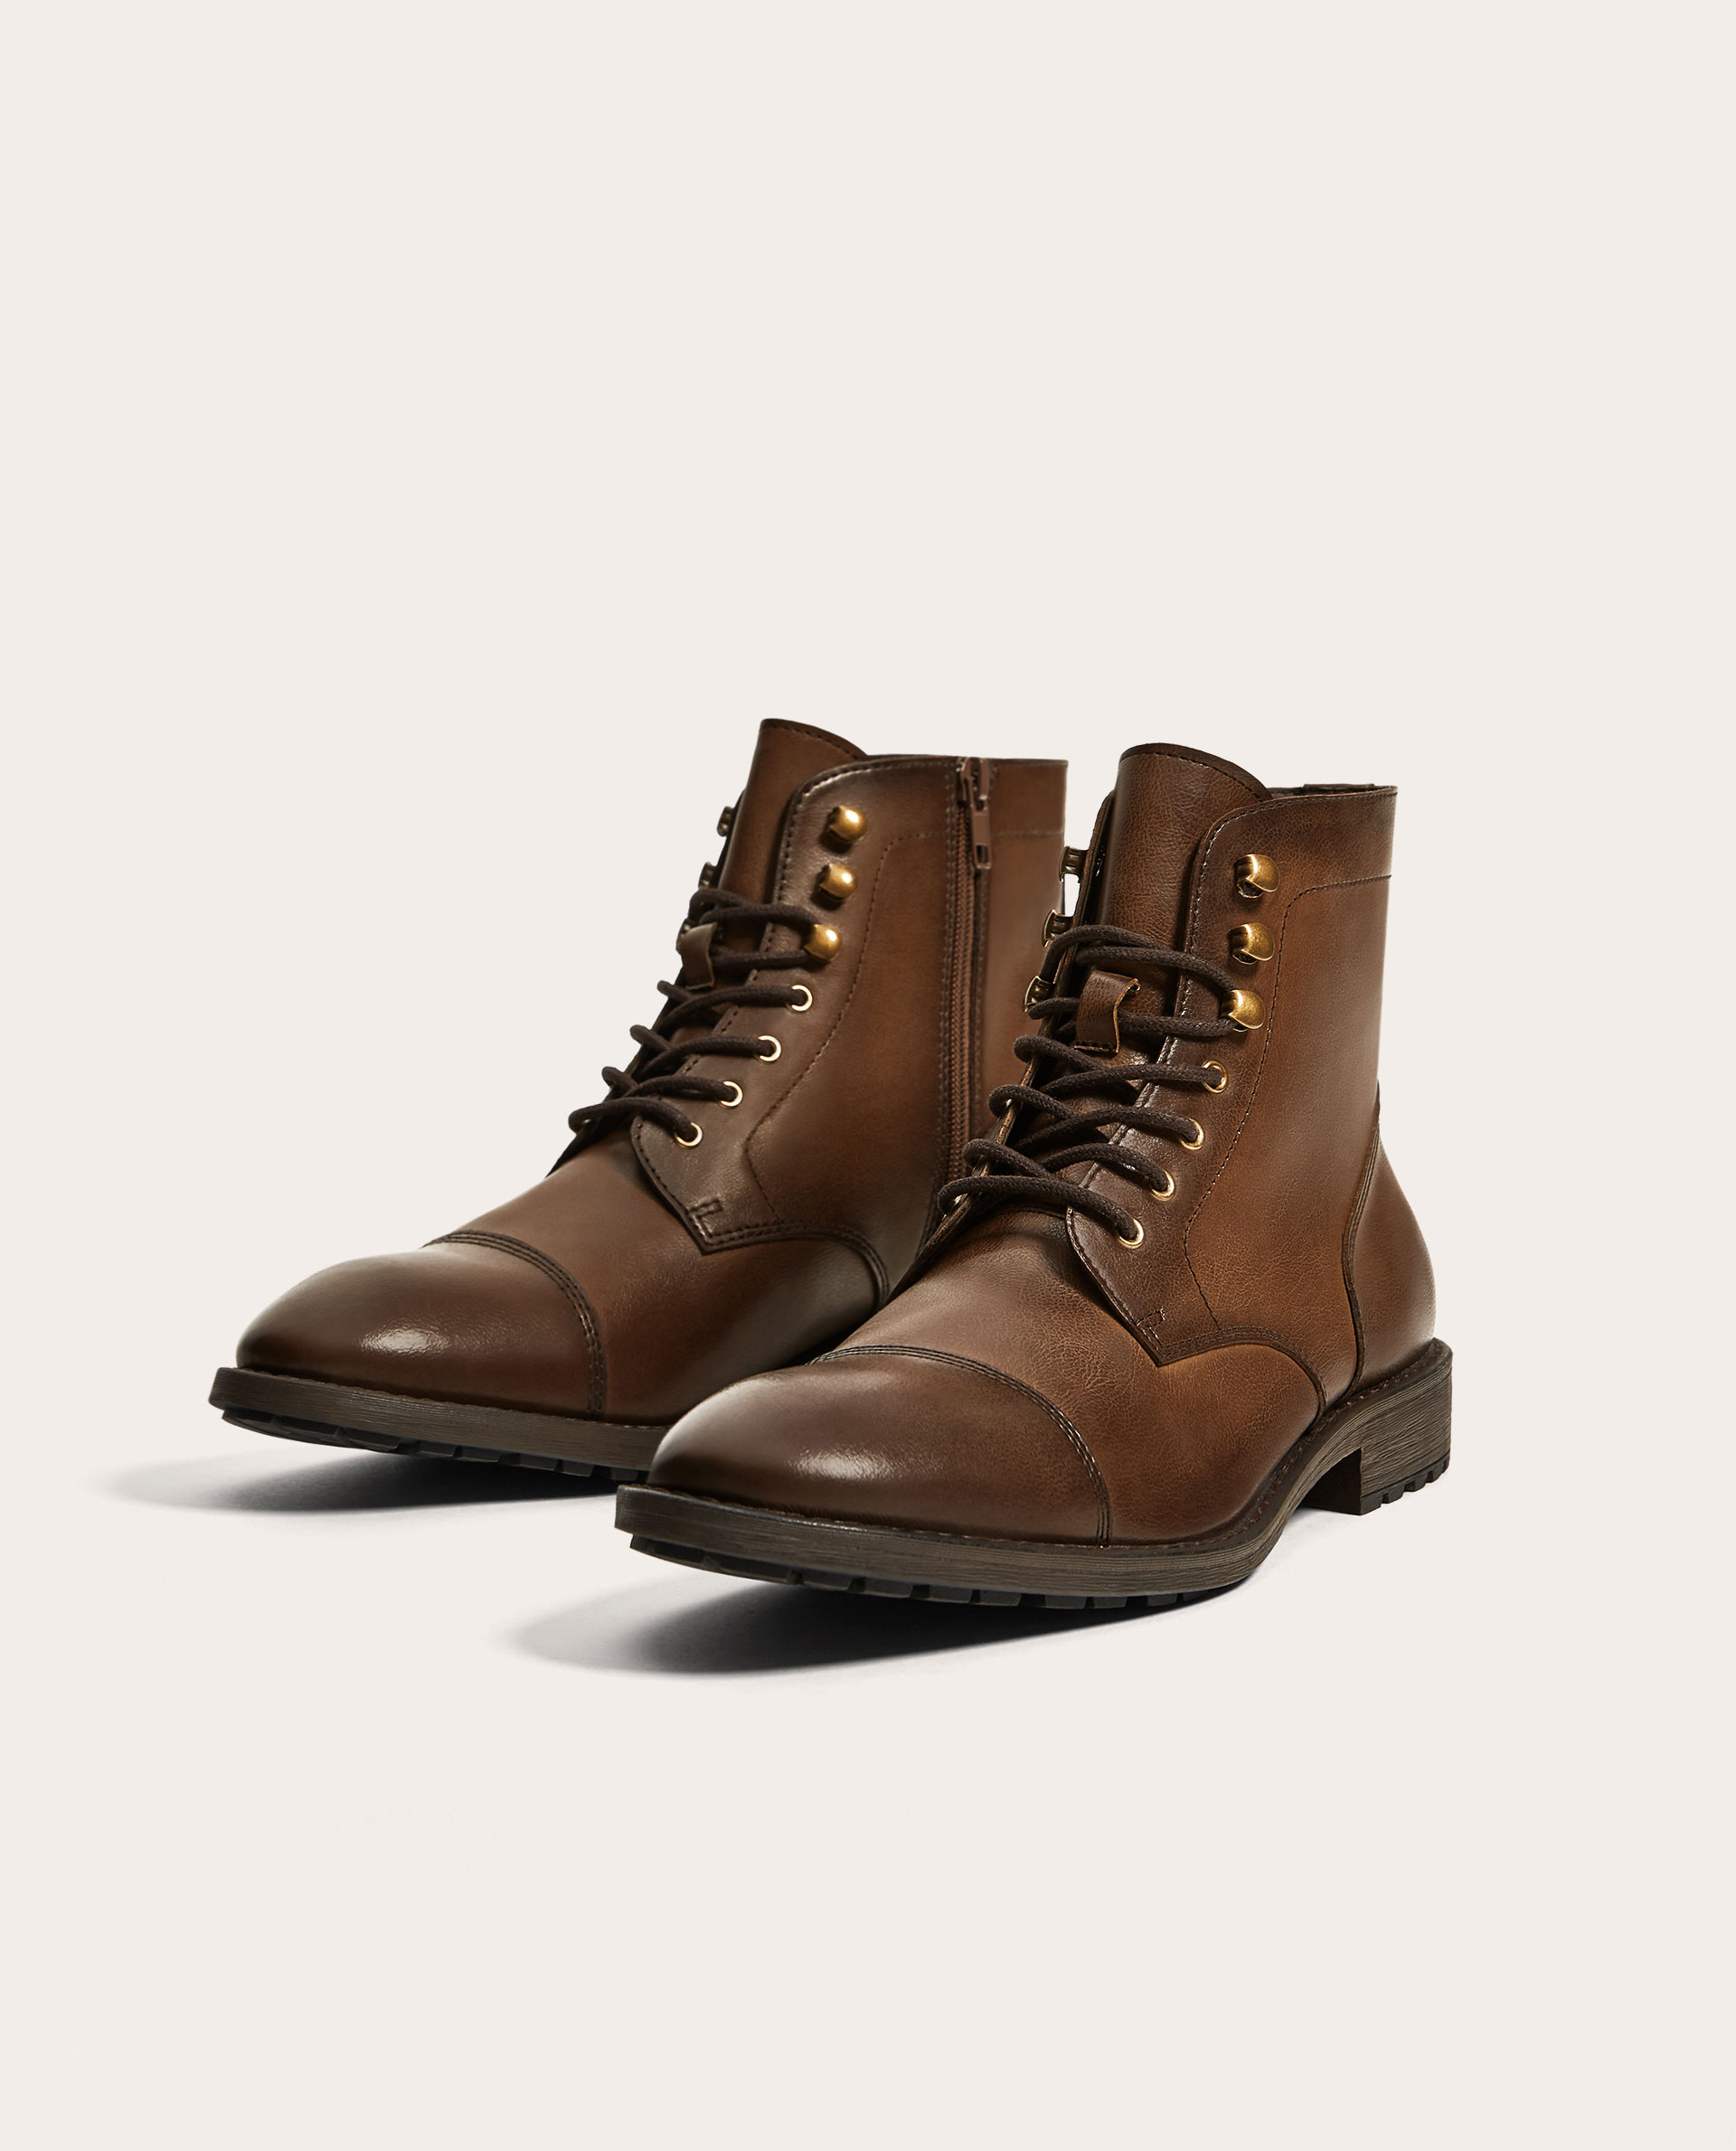 5 Must Have Boots For Men-Winter 2017 — DAPPER & GROOMED